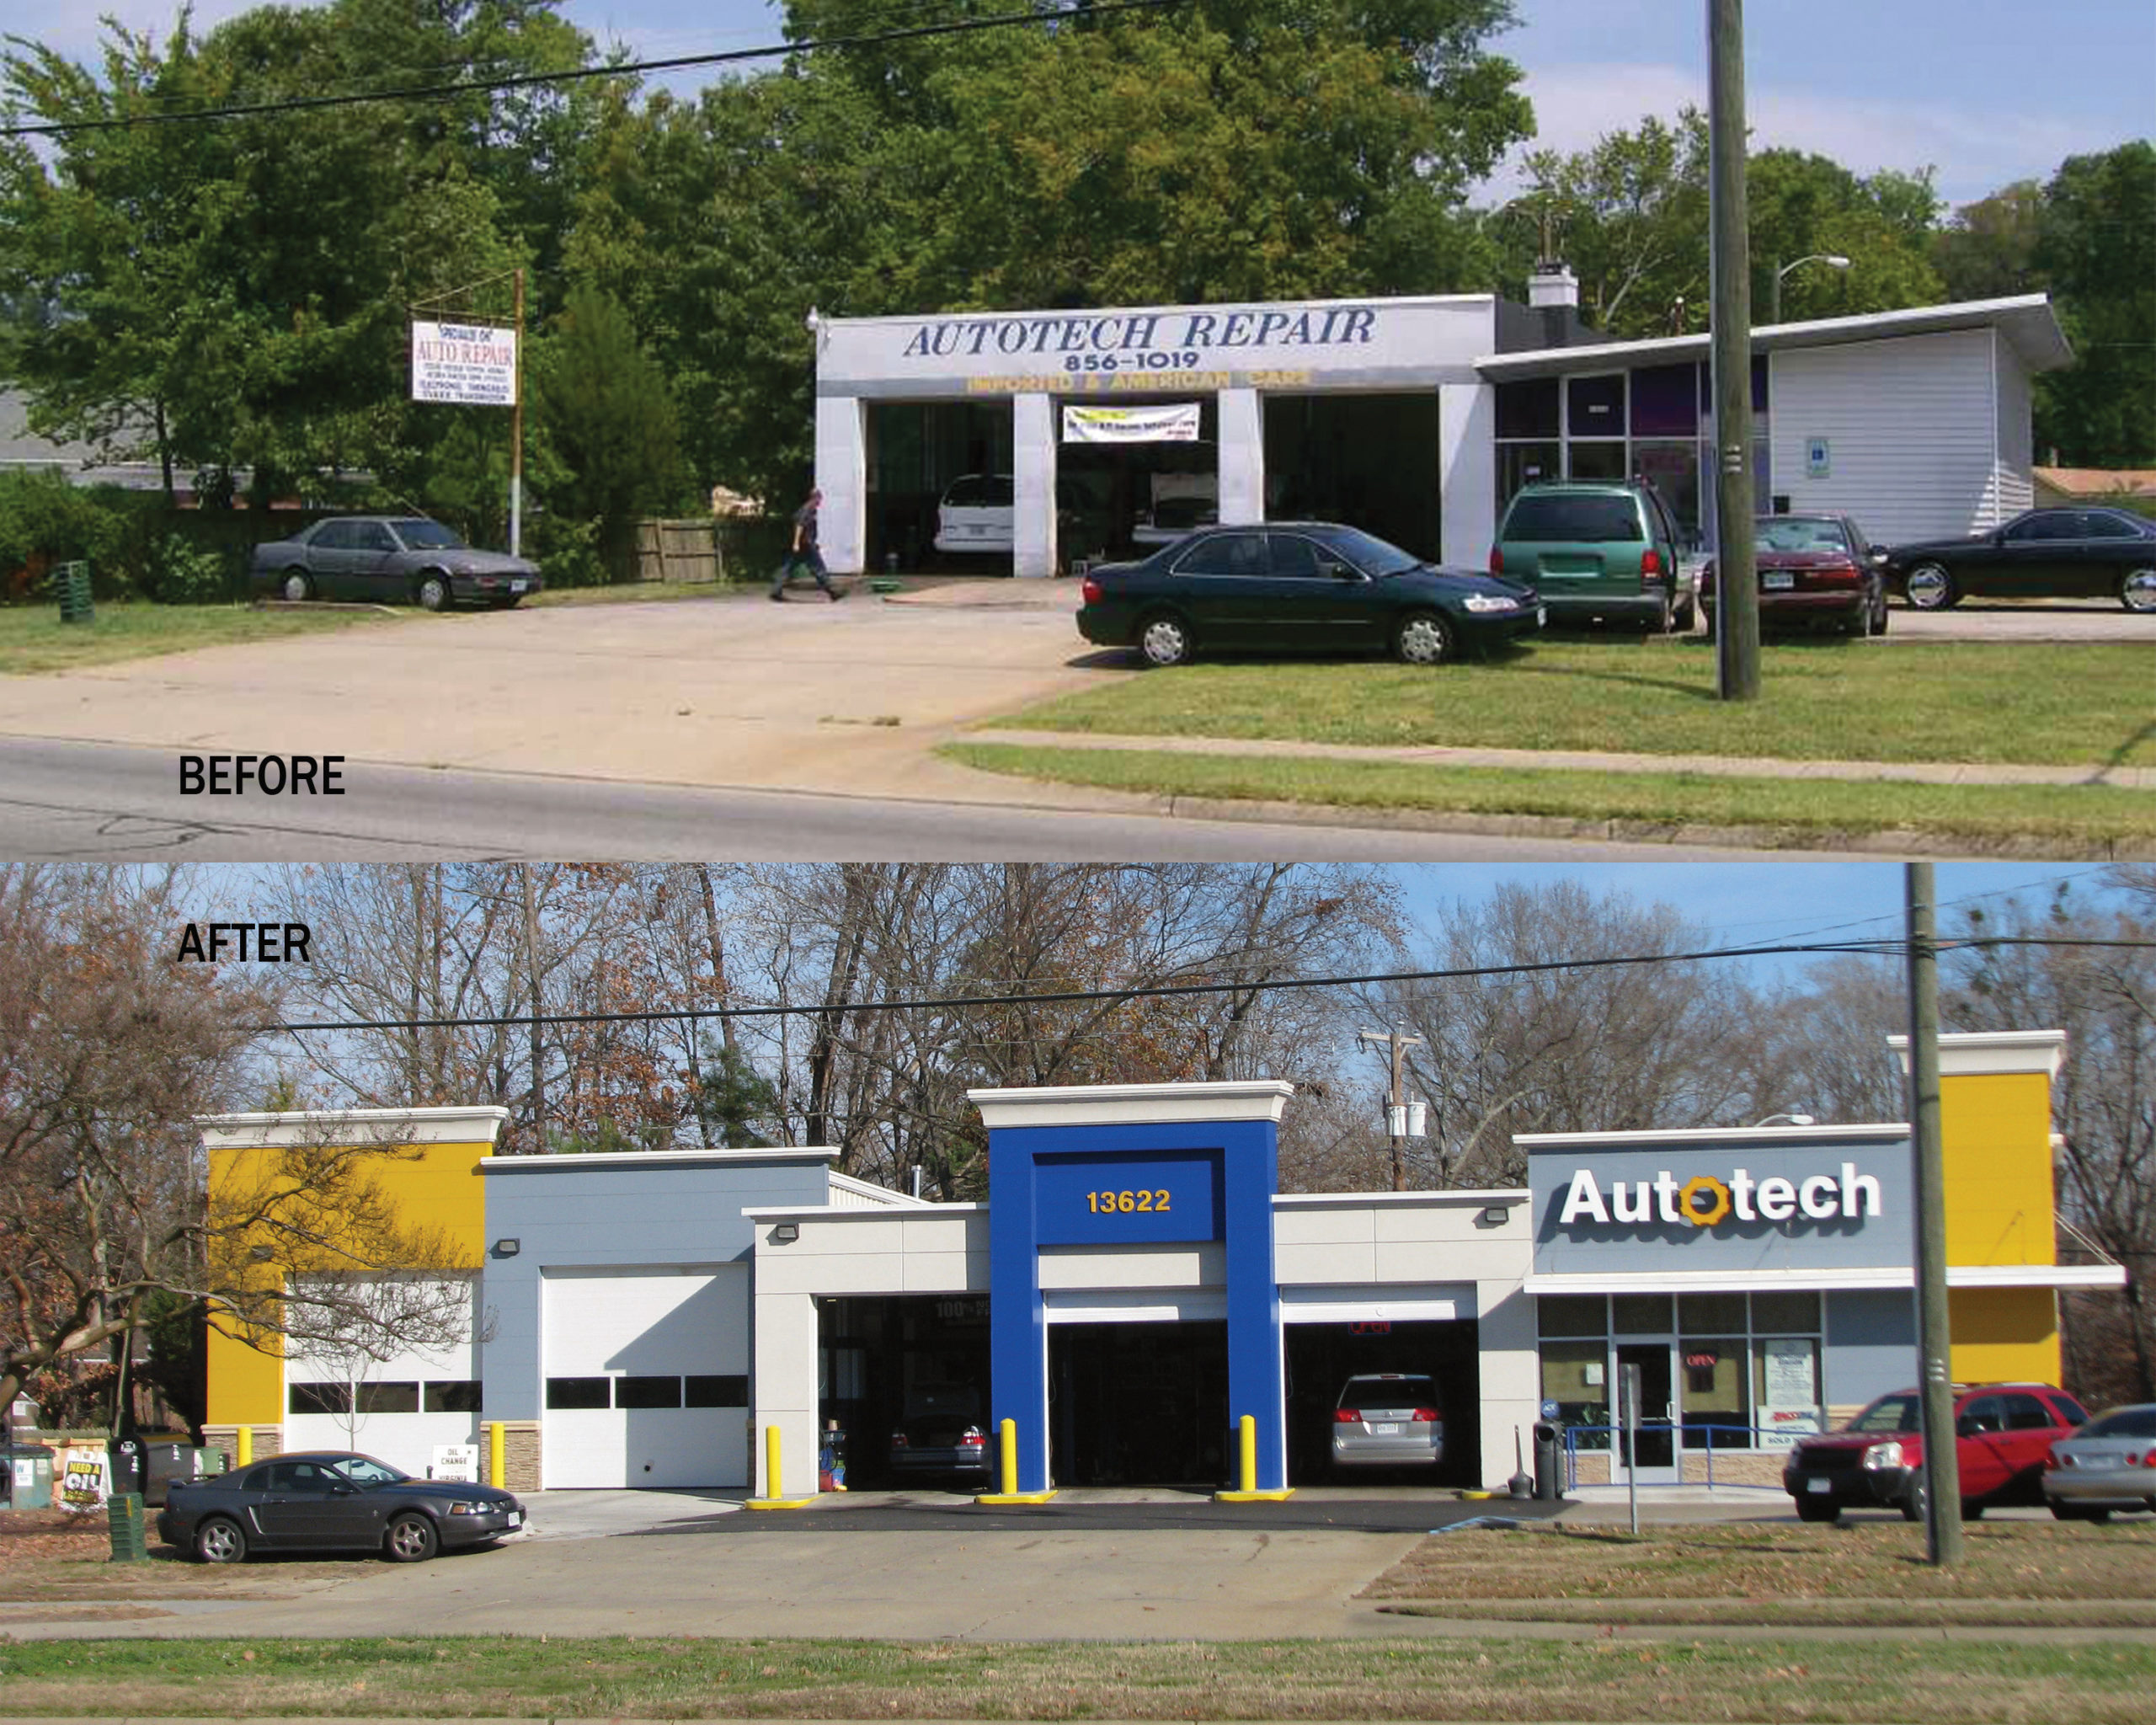 autotech vehicle repair before and after photo